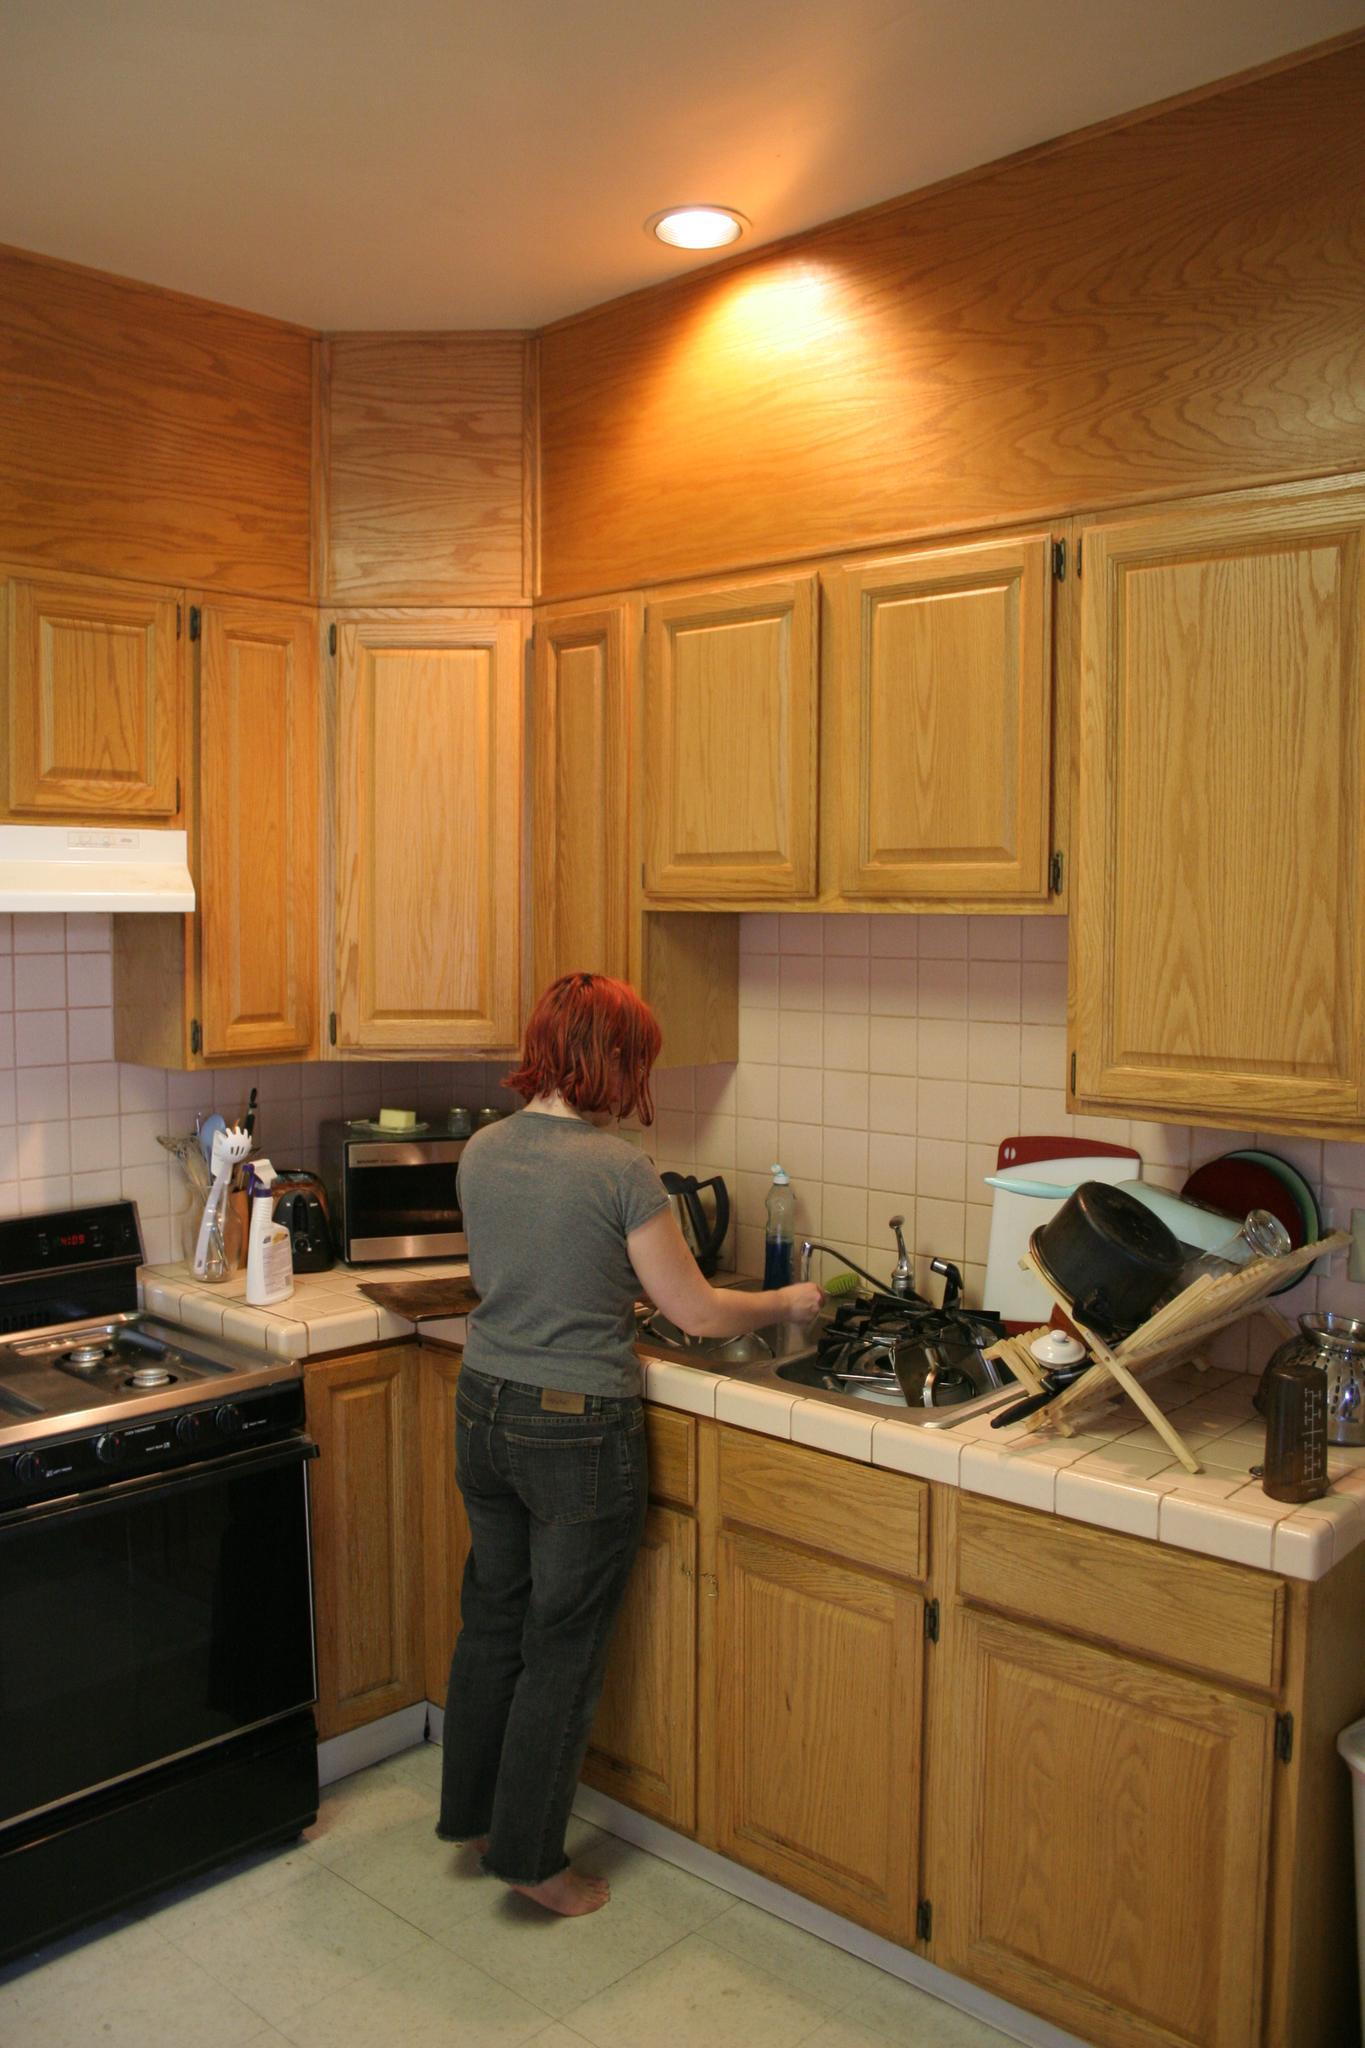 a person is cooking in an empty kitchen